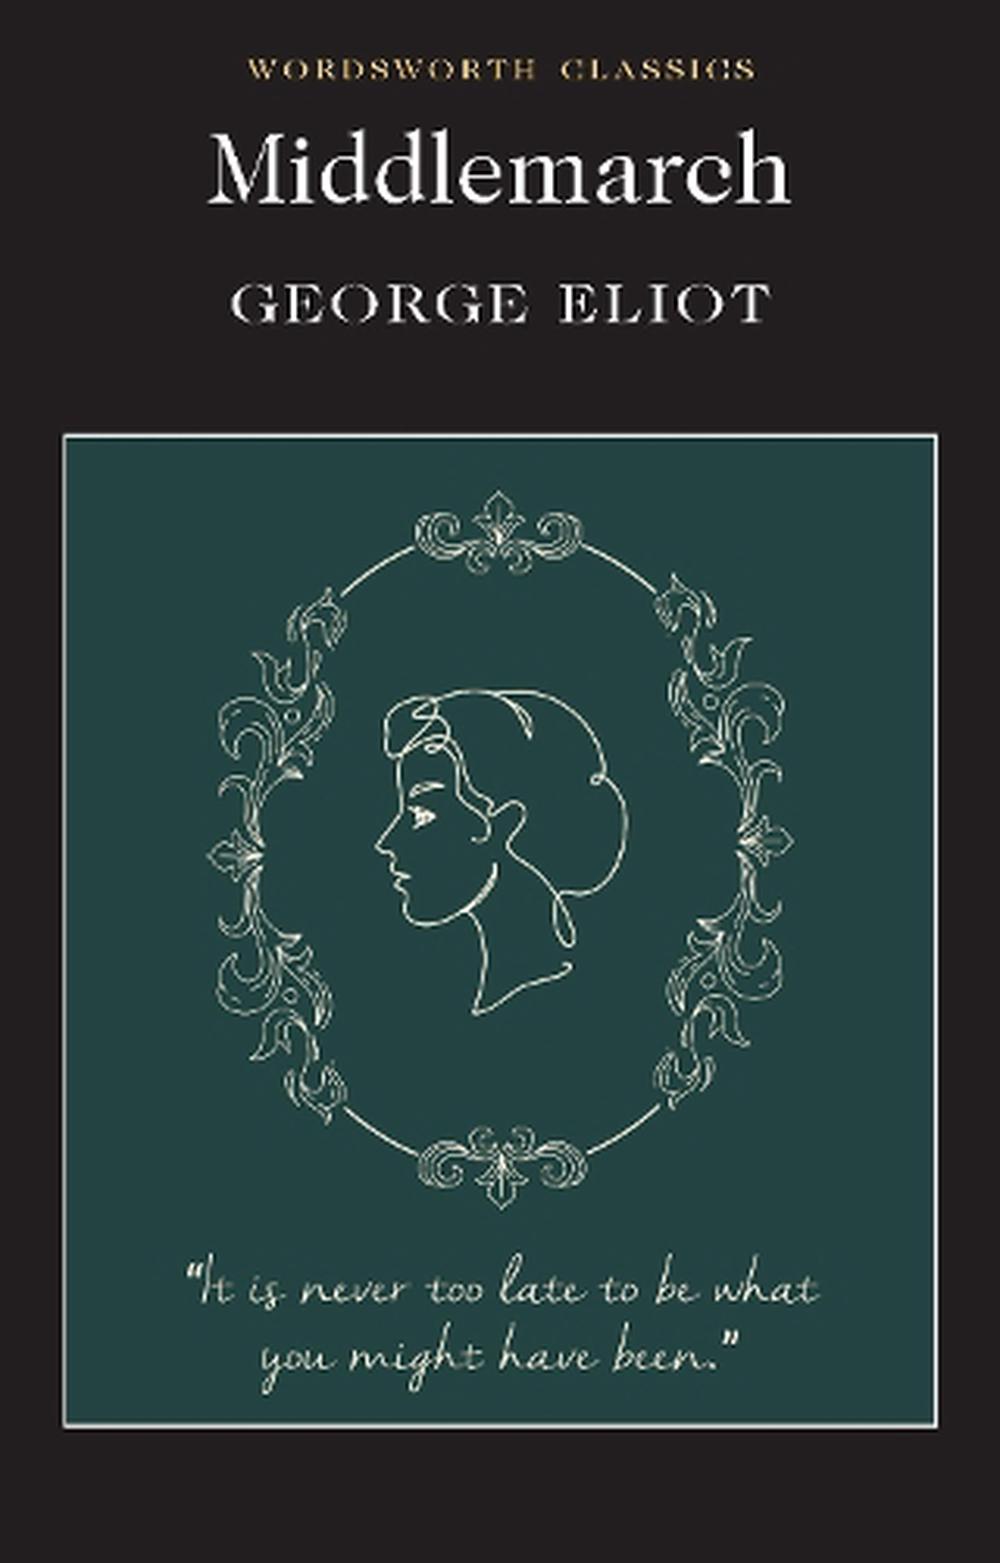 middlemarch cliff notes